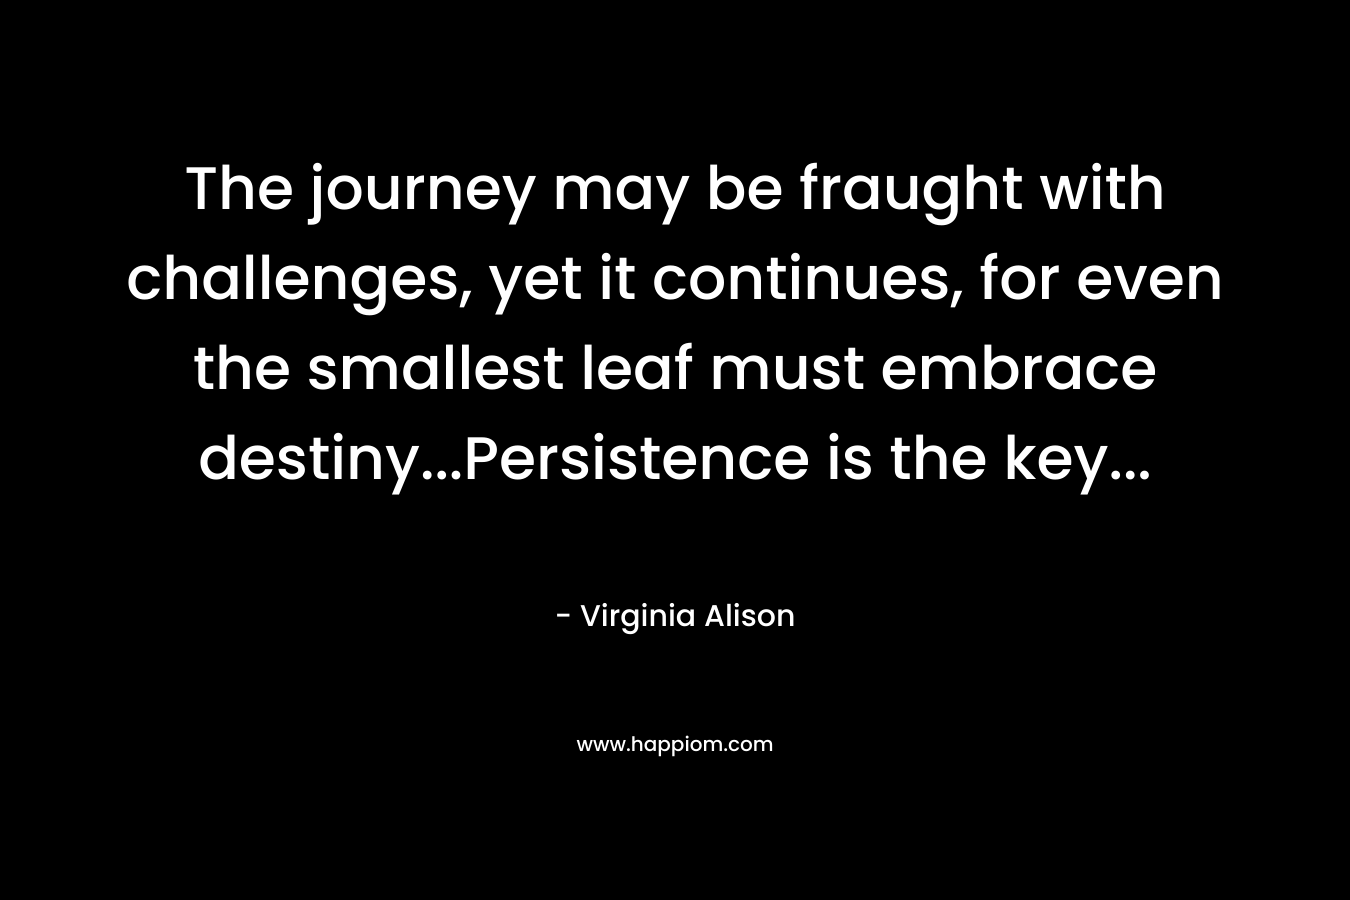 The journey may be fraught with challenges, yet it continues, for even the smallest leaf must embrace destiny…Persistence is the key… – Virginia Alison